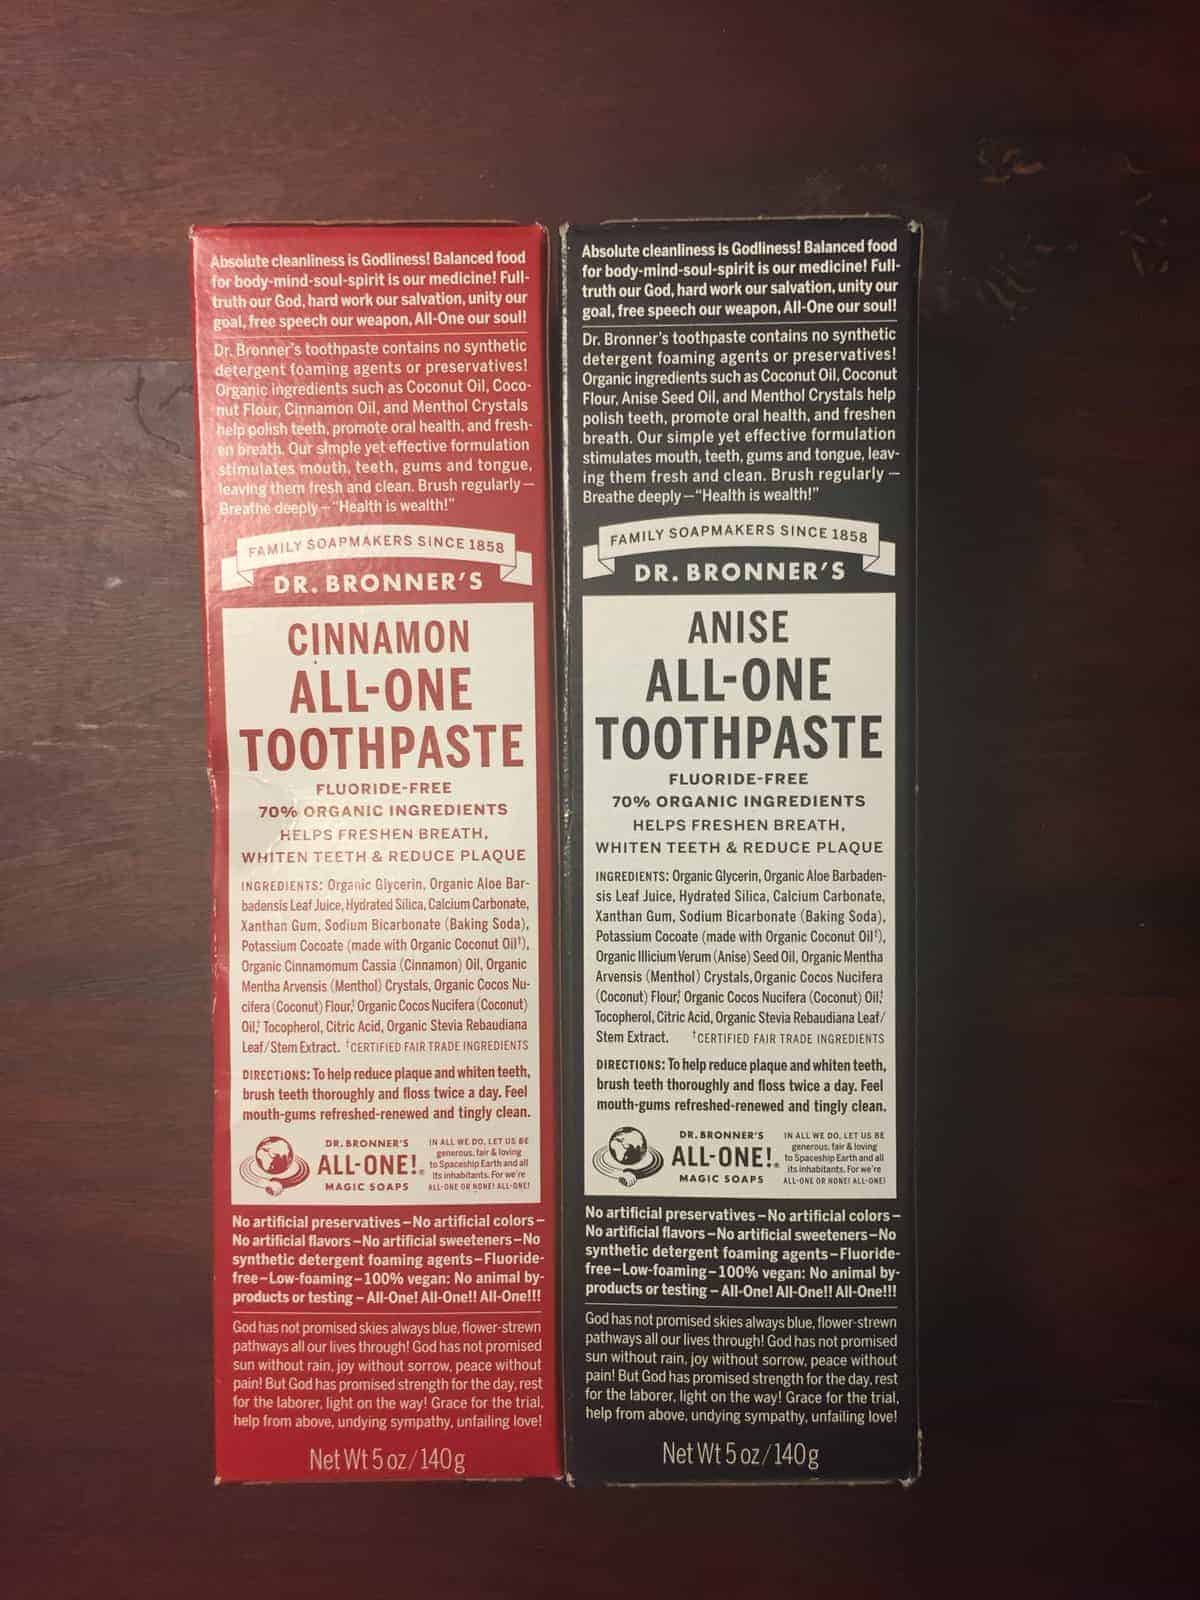 Dr. Bronner's All-One ﻿Toothpaste